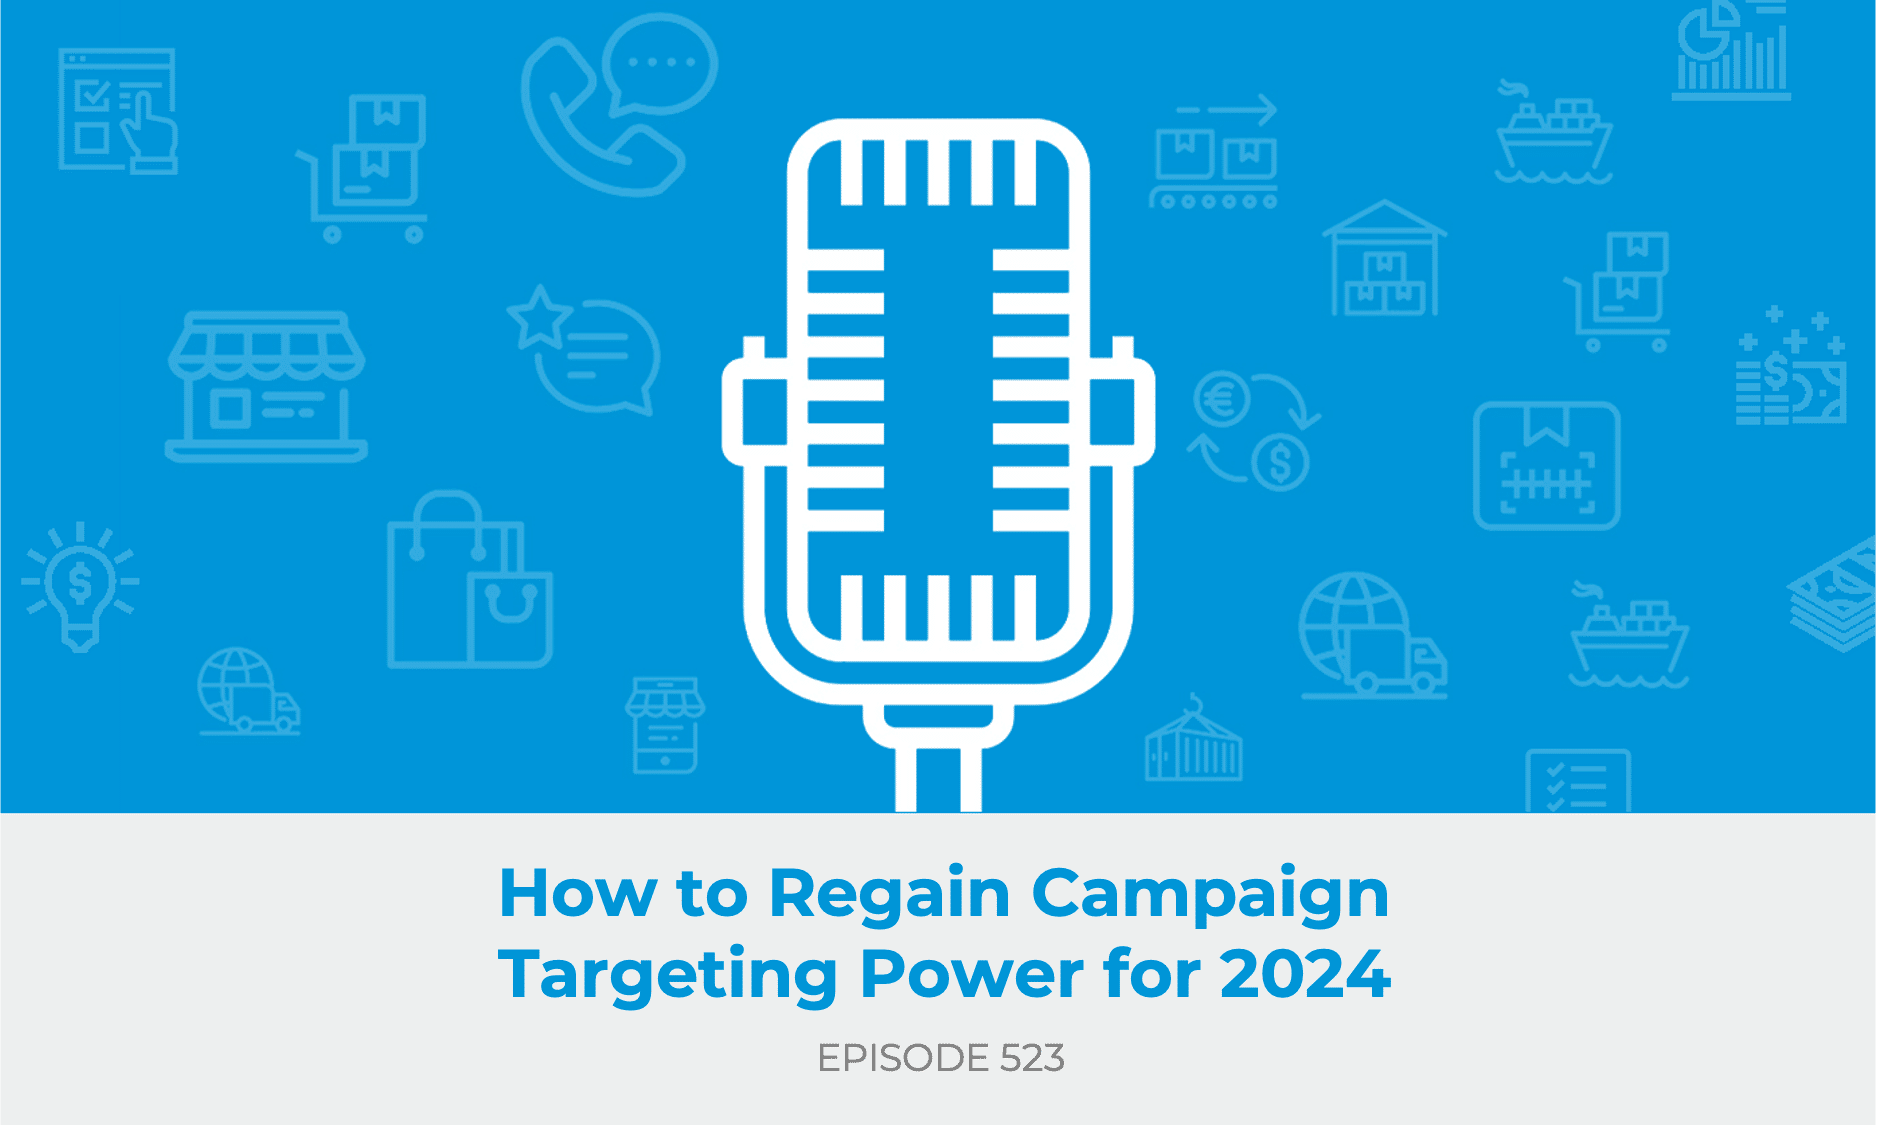 How to Regain Campaign Targeting Power for 2024